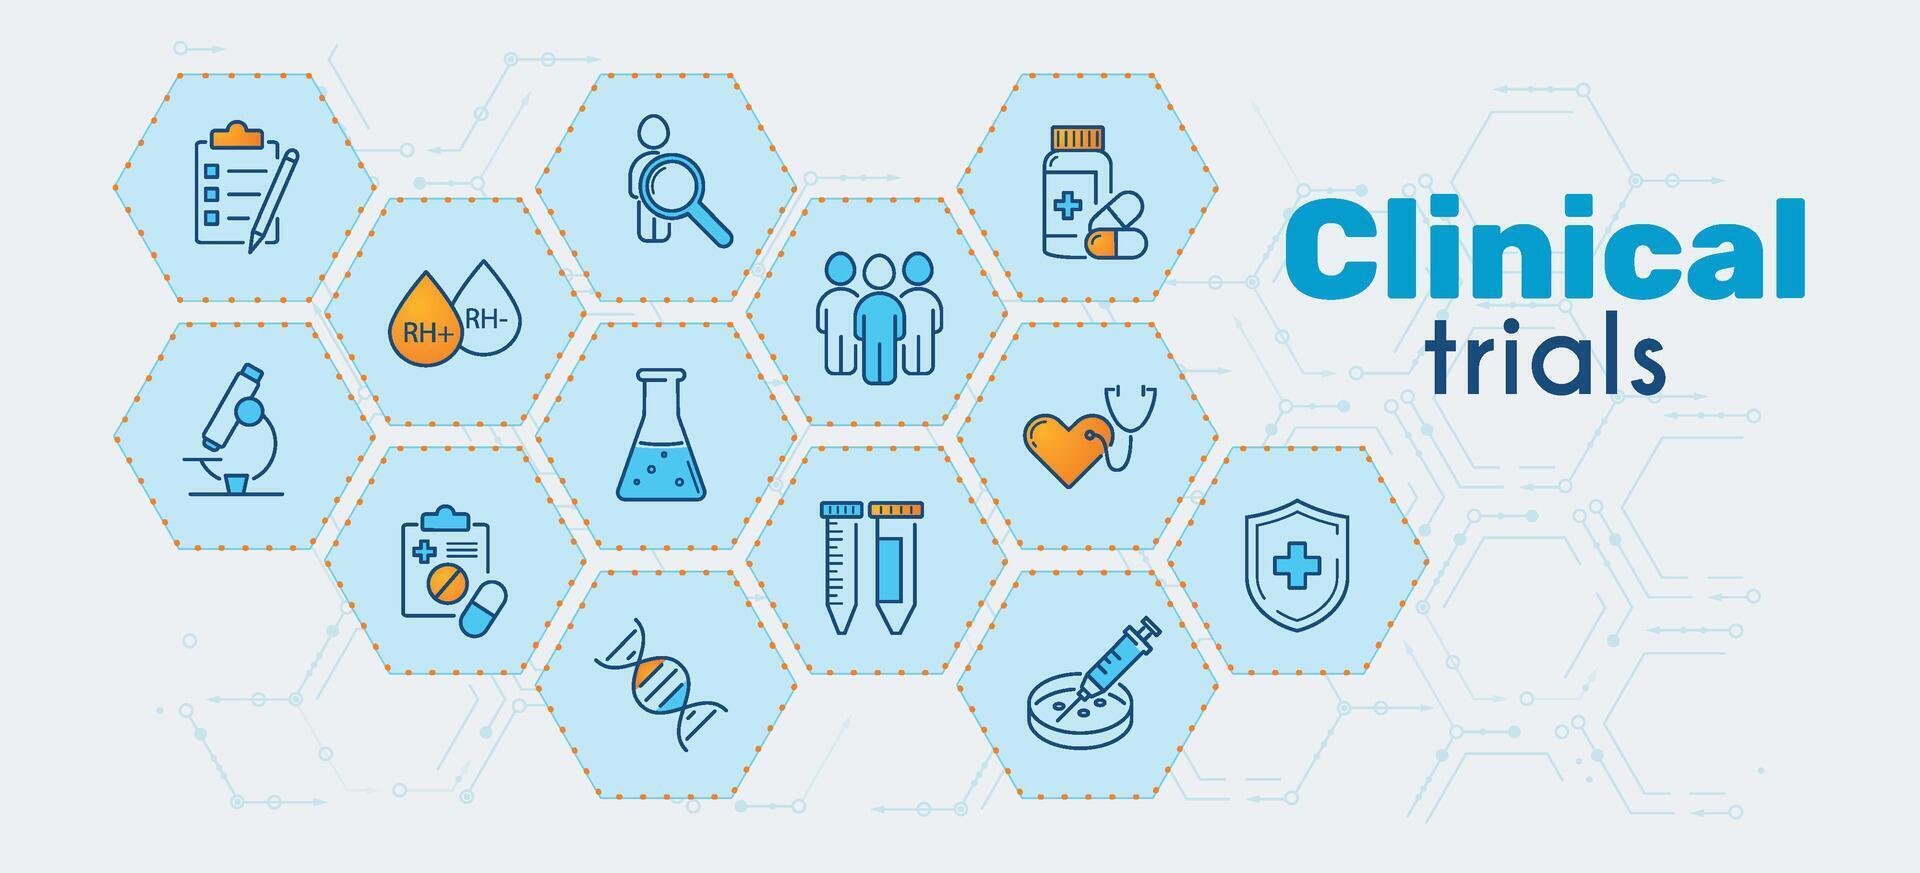 Clinical studies, trials, experiments. Concept in blue and orange color on a background of hexagons or honeycomb. Line icons on the theme of medicine. Vector